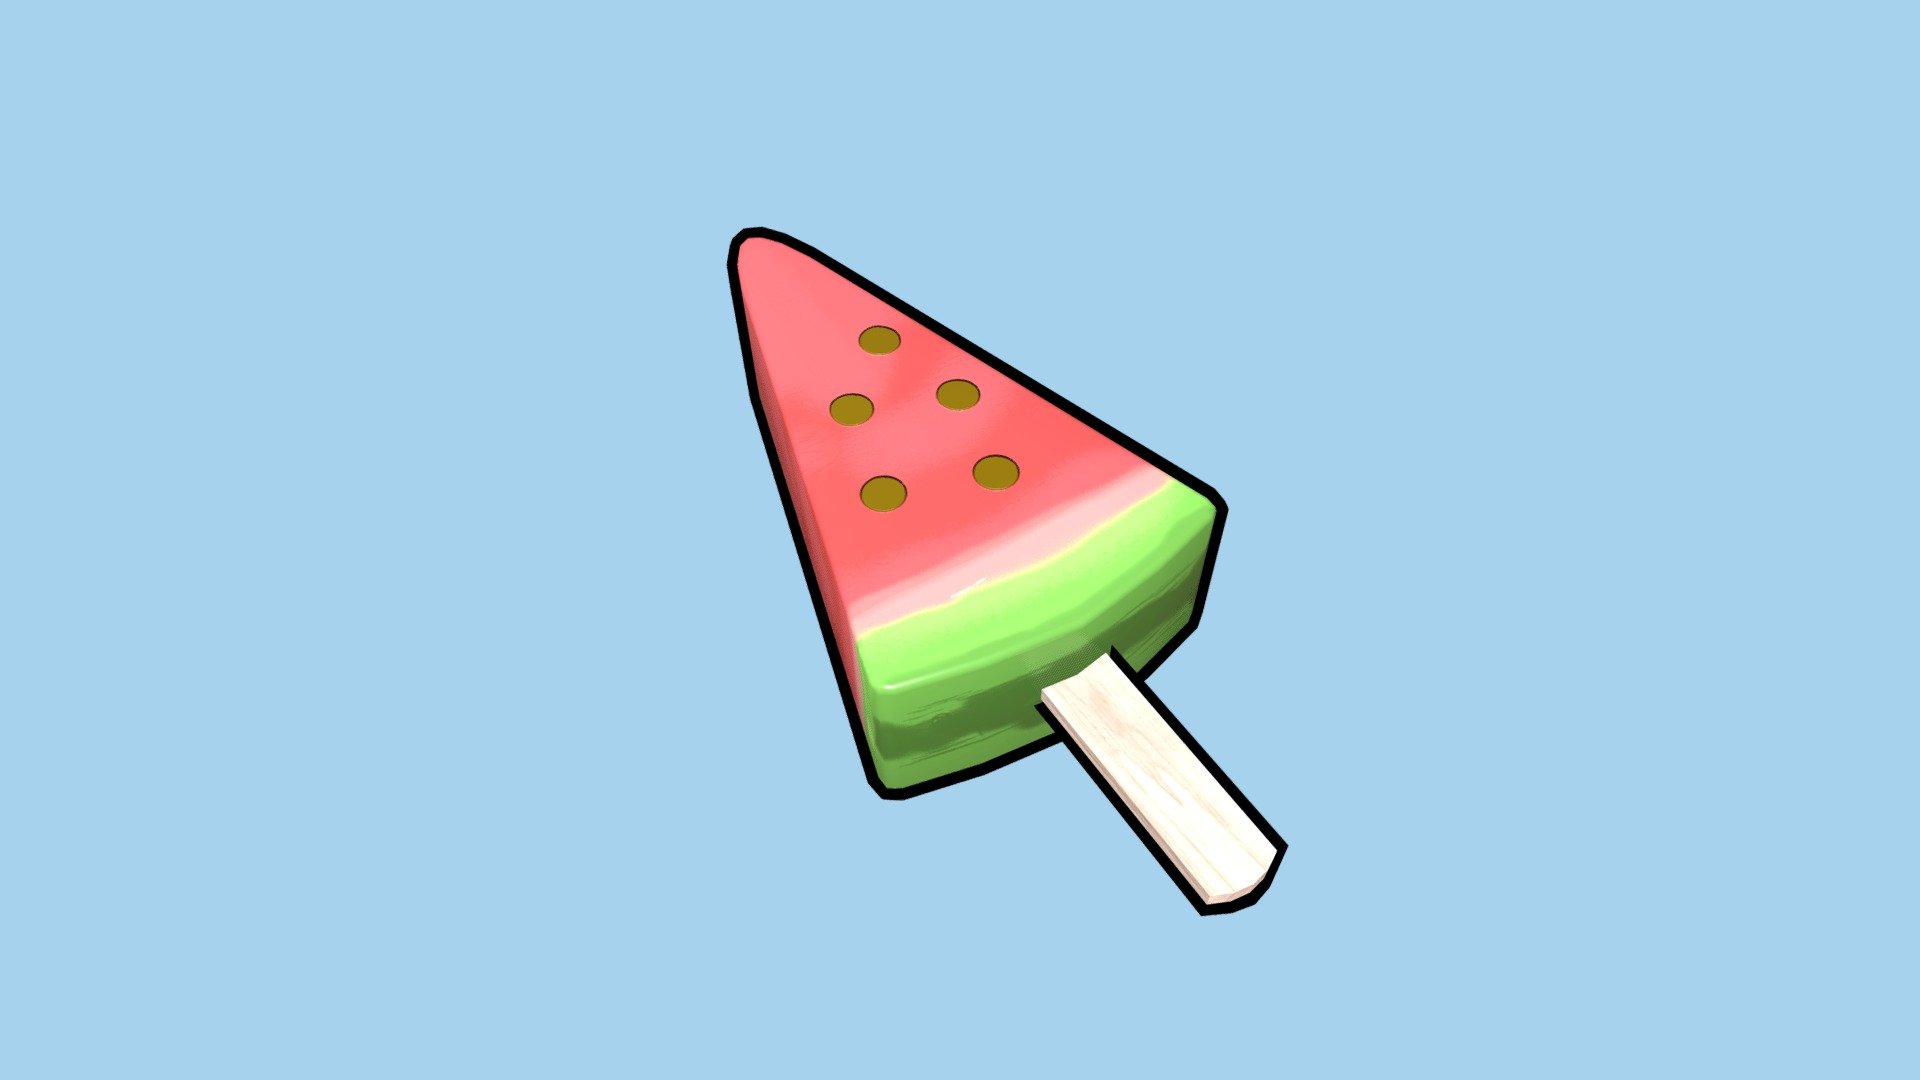 While I was out on my adventures I found these little ice lollys and thought they were amazing so I decided to make this for my modelling and texturing practice.

Check out my twitter! - https://twitter.com/Karl_Bruce3D - Watermelon Ice Lolly 3d model